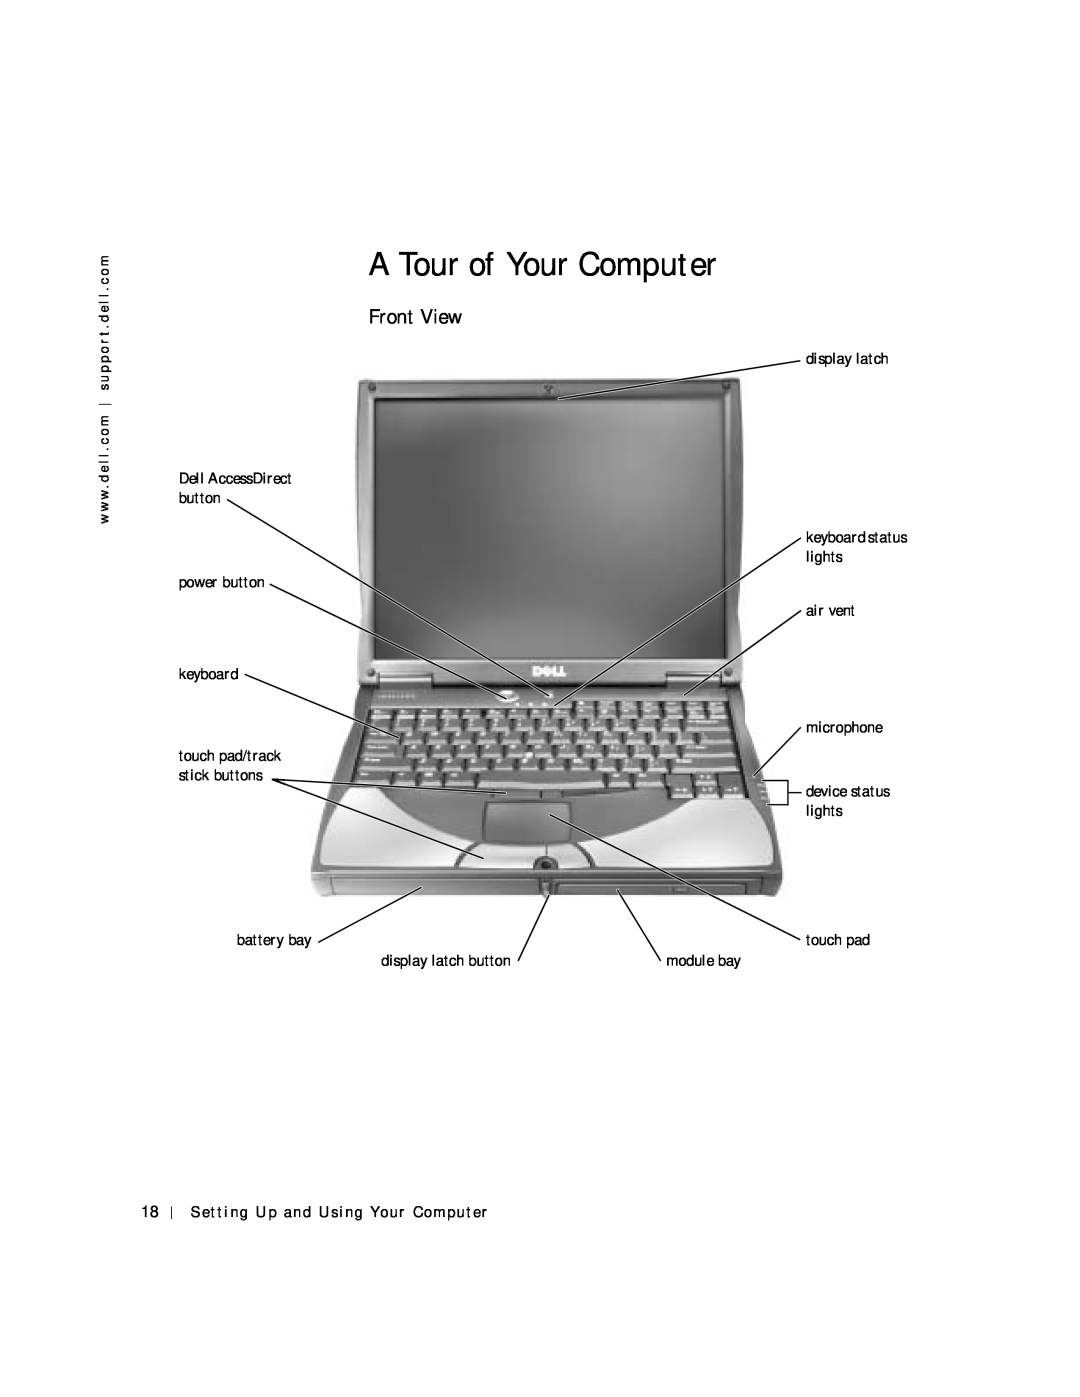 Dell 4150 owner manual A Tour of Your Computer, Front View, Setting Up and Using Your Computer 